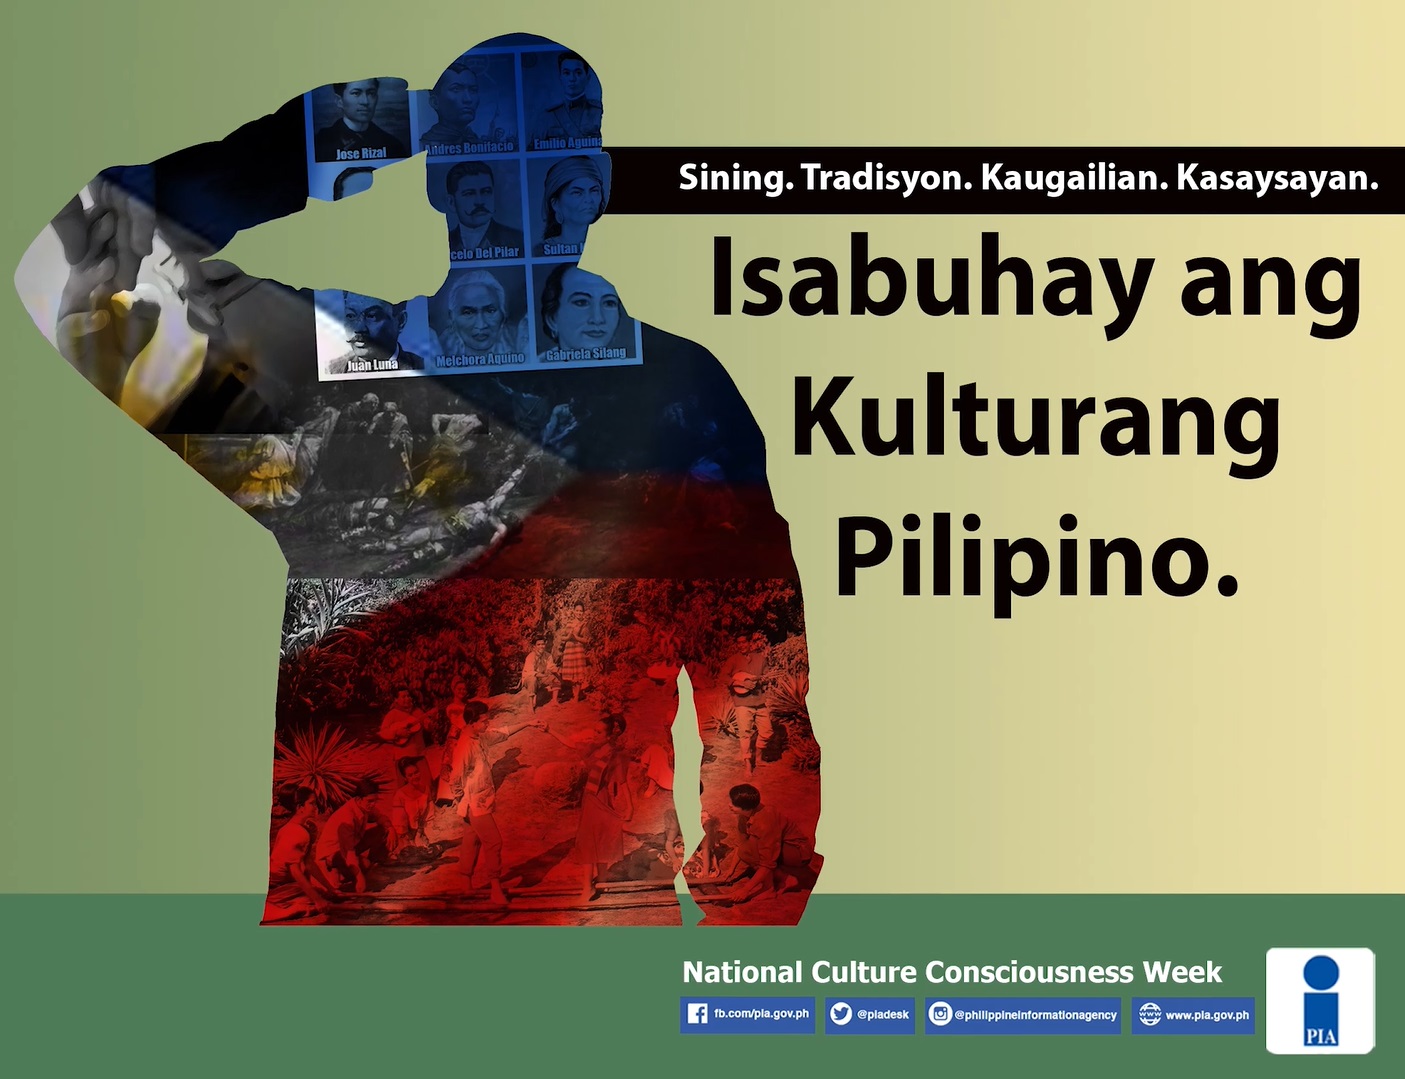 National Culture Consciousness Week